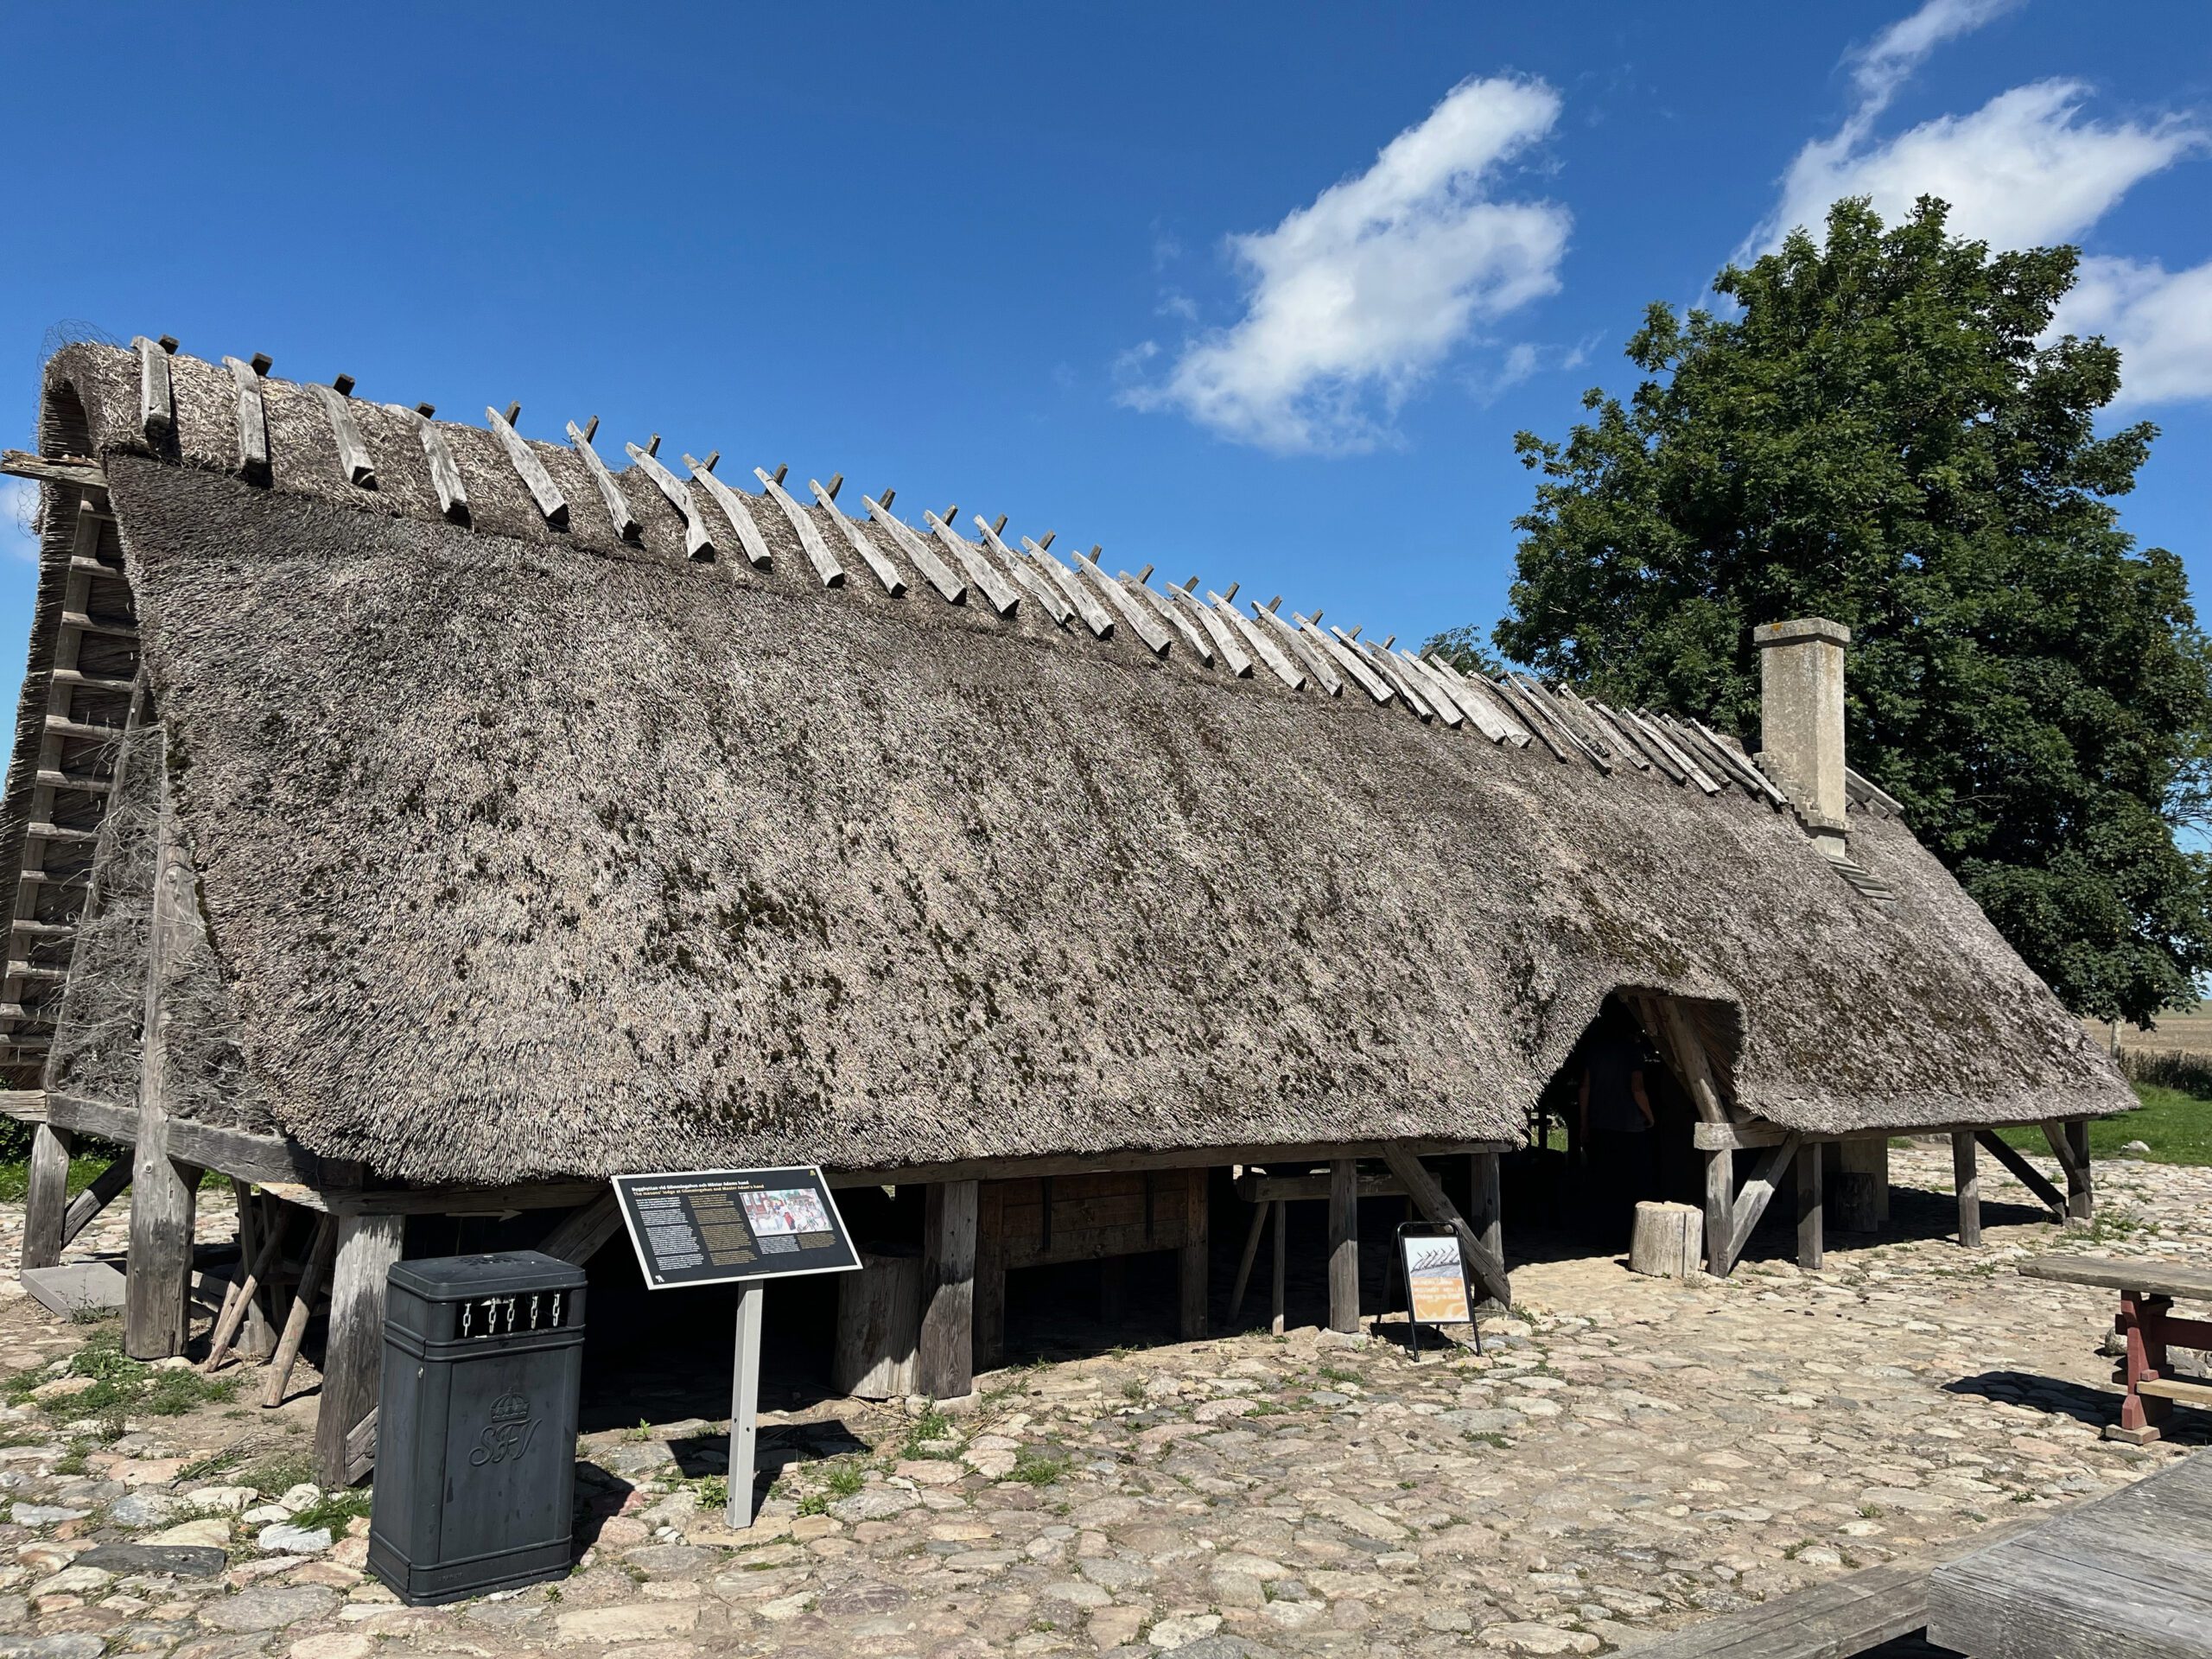 A long, low building with a thatched roof and open walls. A chimney is on the right side of the roof. The ground in front is paved with cobblestones. A tree stands diagonally behind on the right.